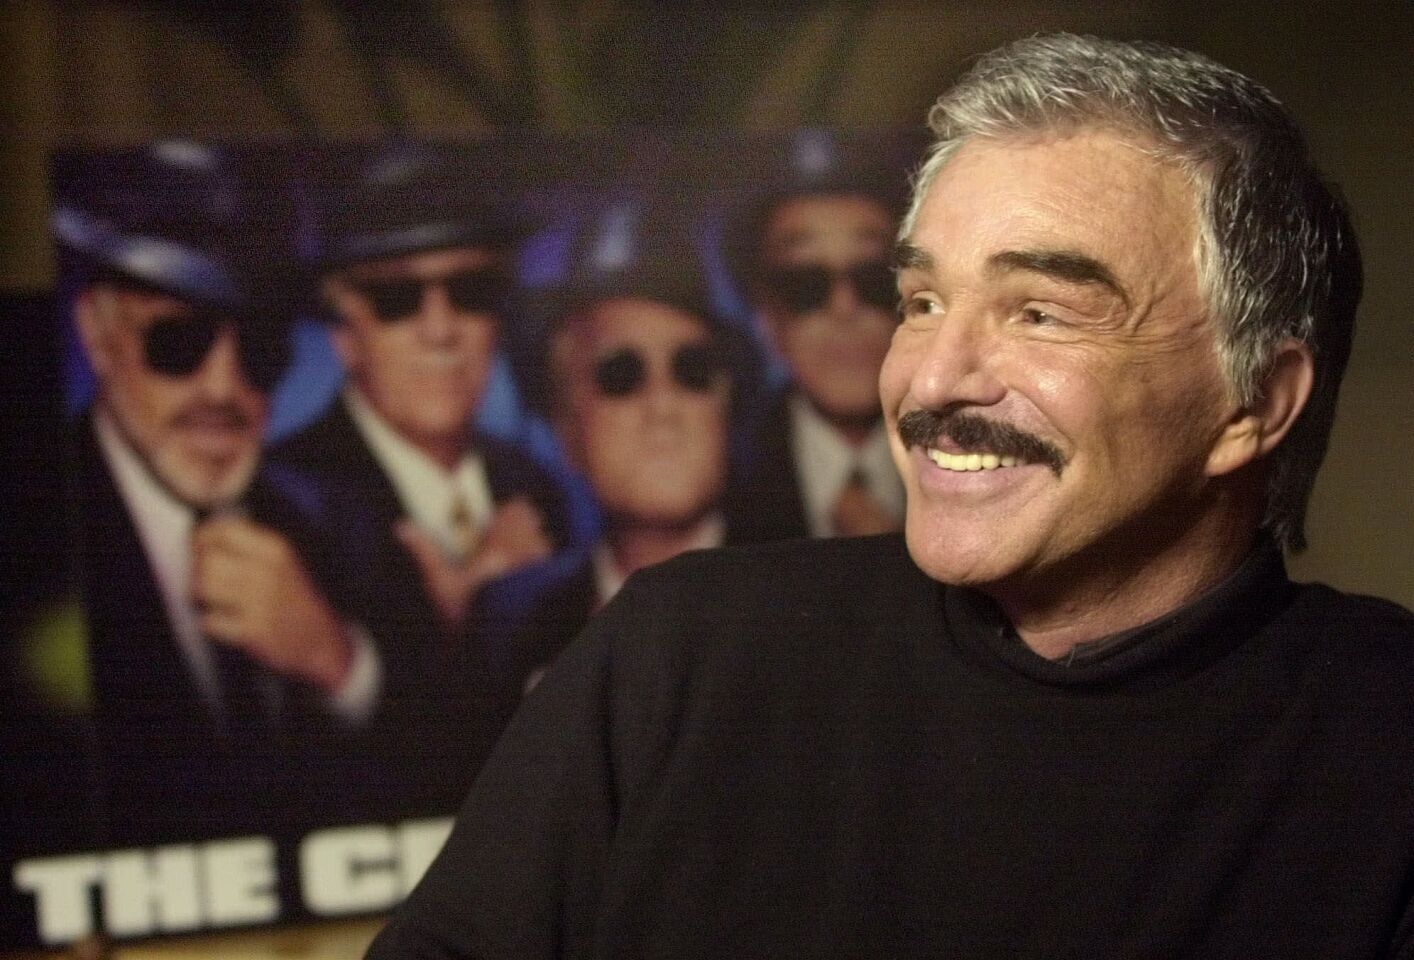 Sally Field, plastic surgery and posing nude — Burt Reynolds discussed ...